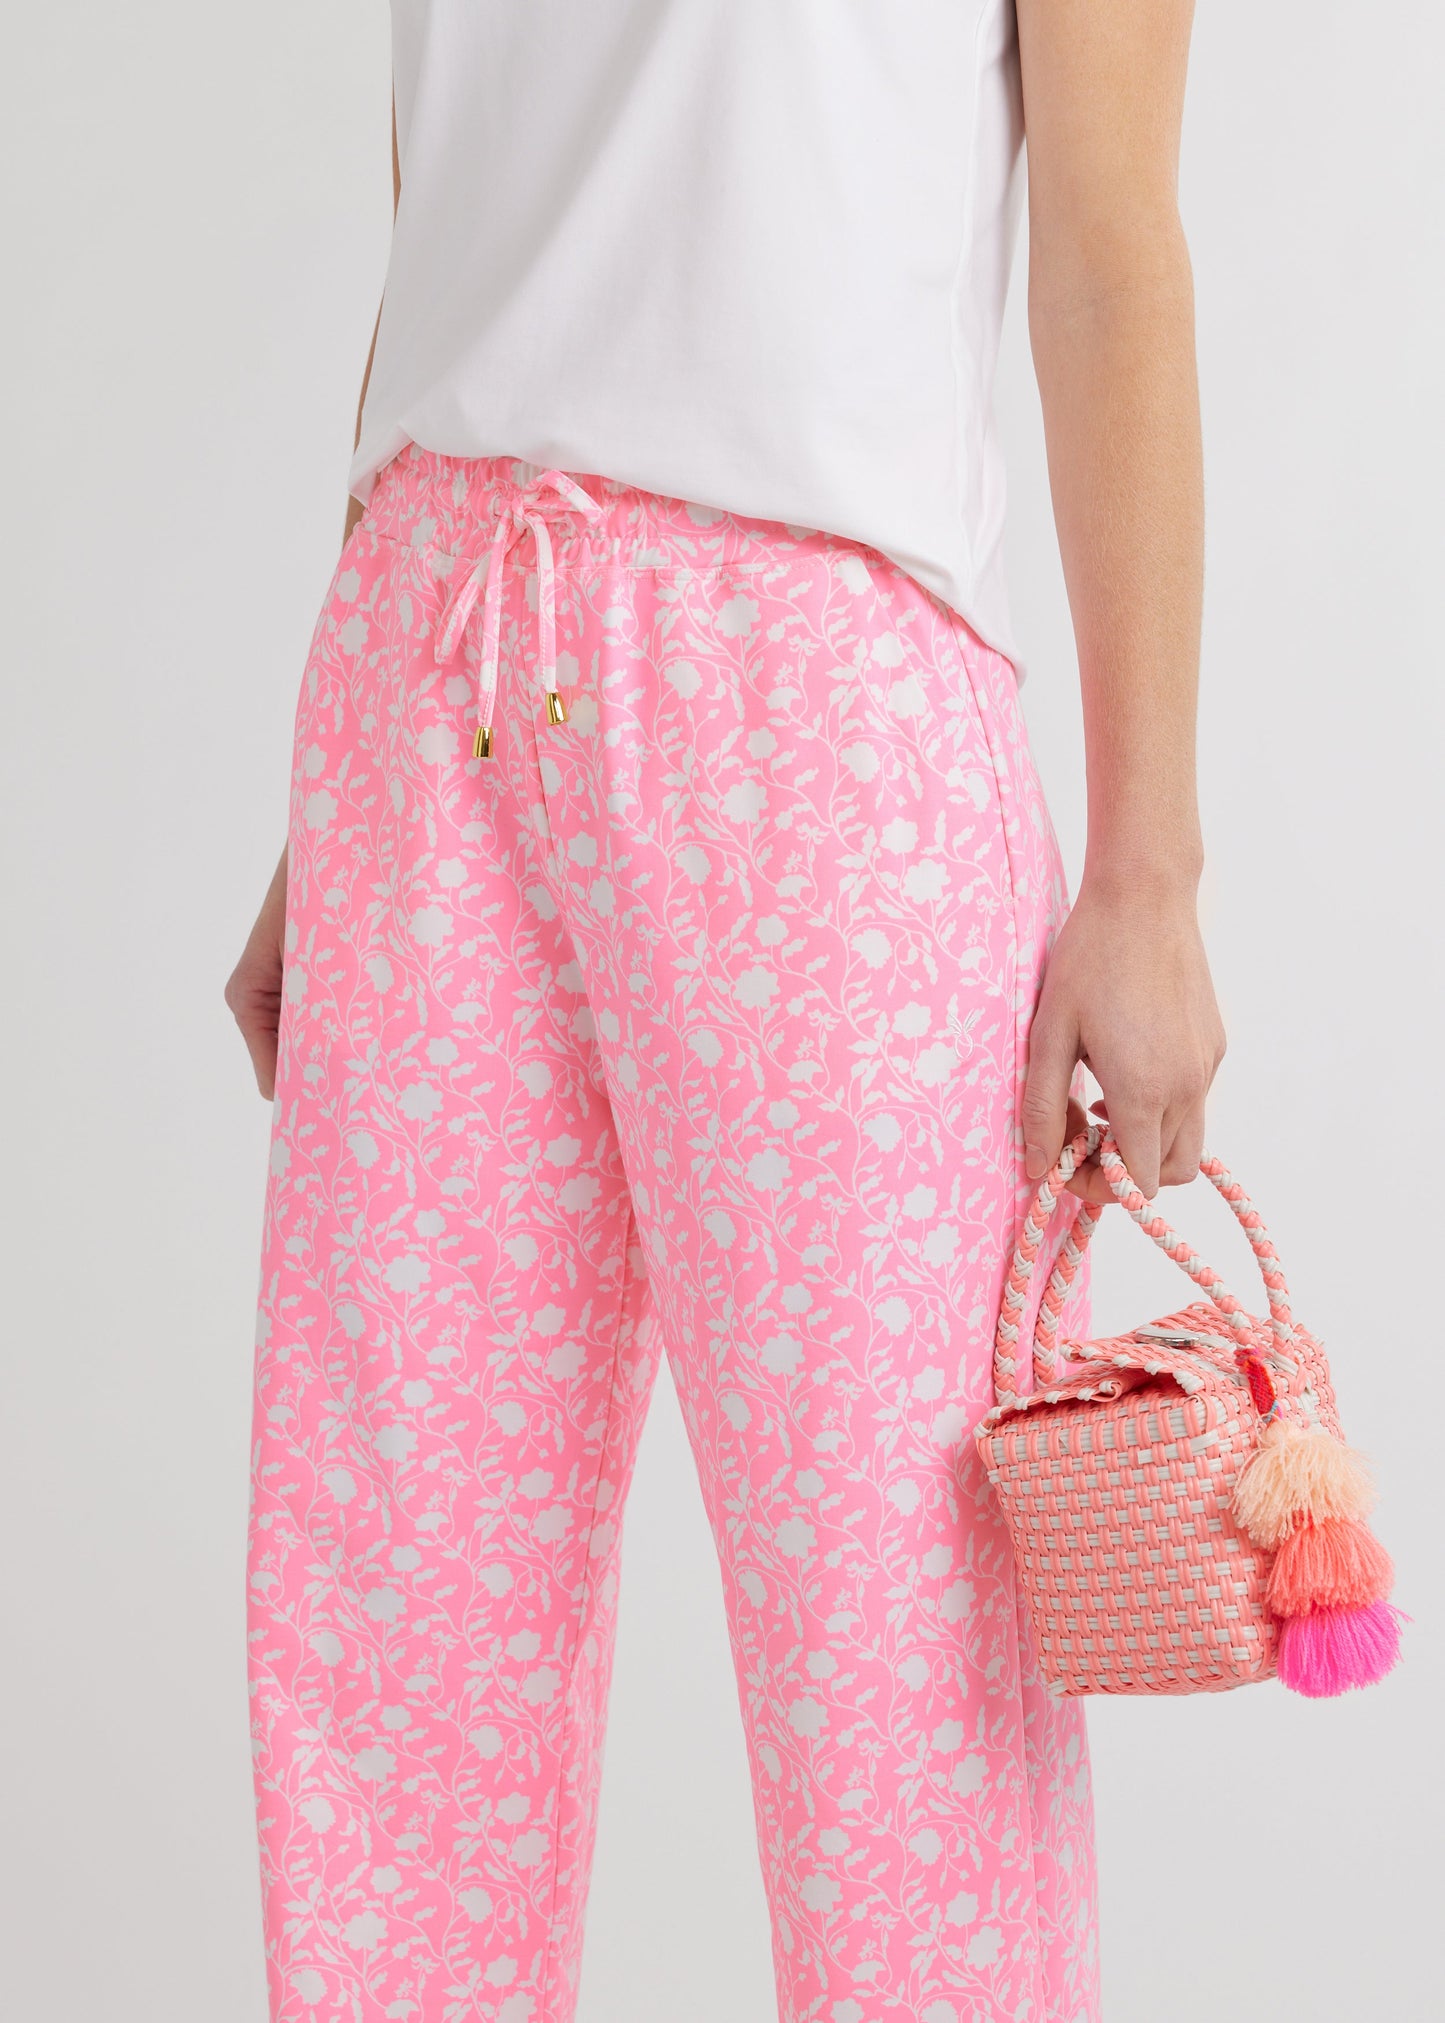 Palisades Pant in Repreve® Stretch (Cotton Candy Floral)